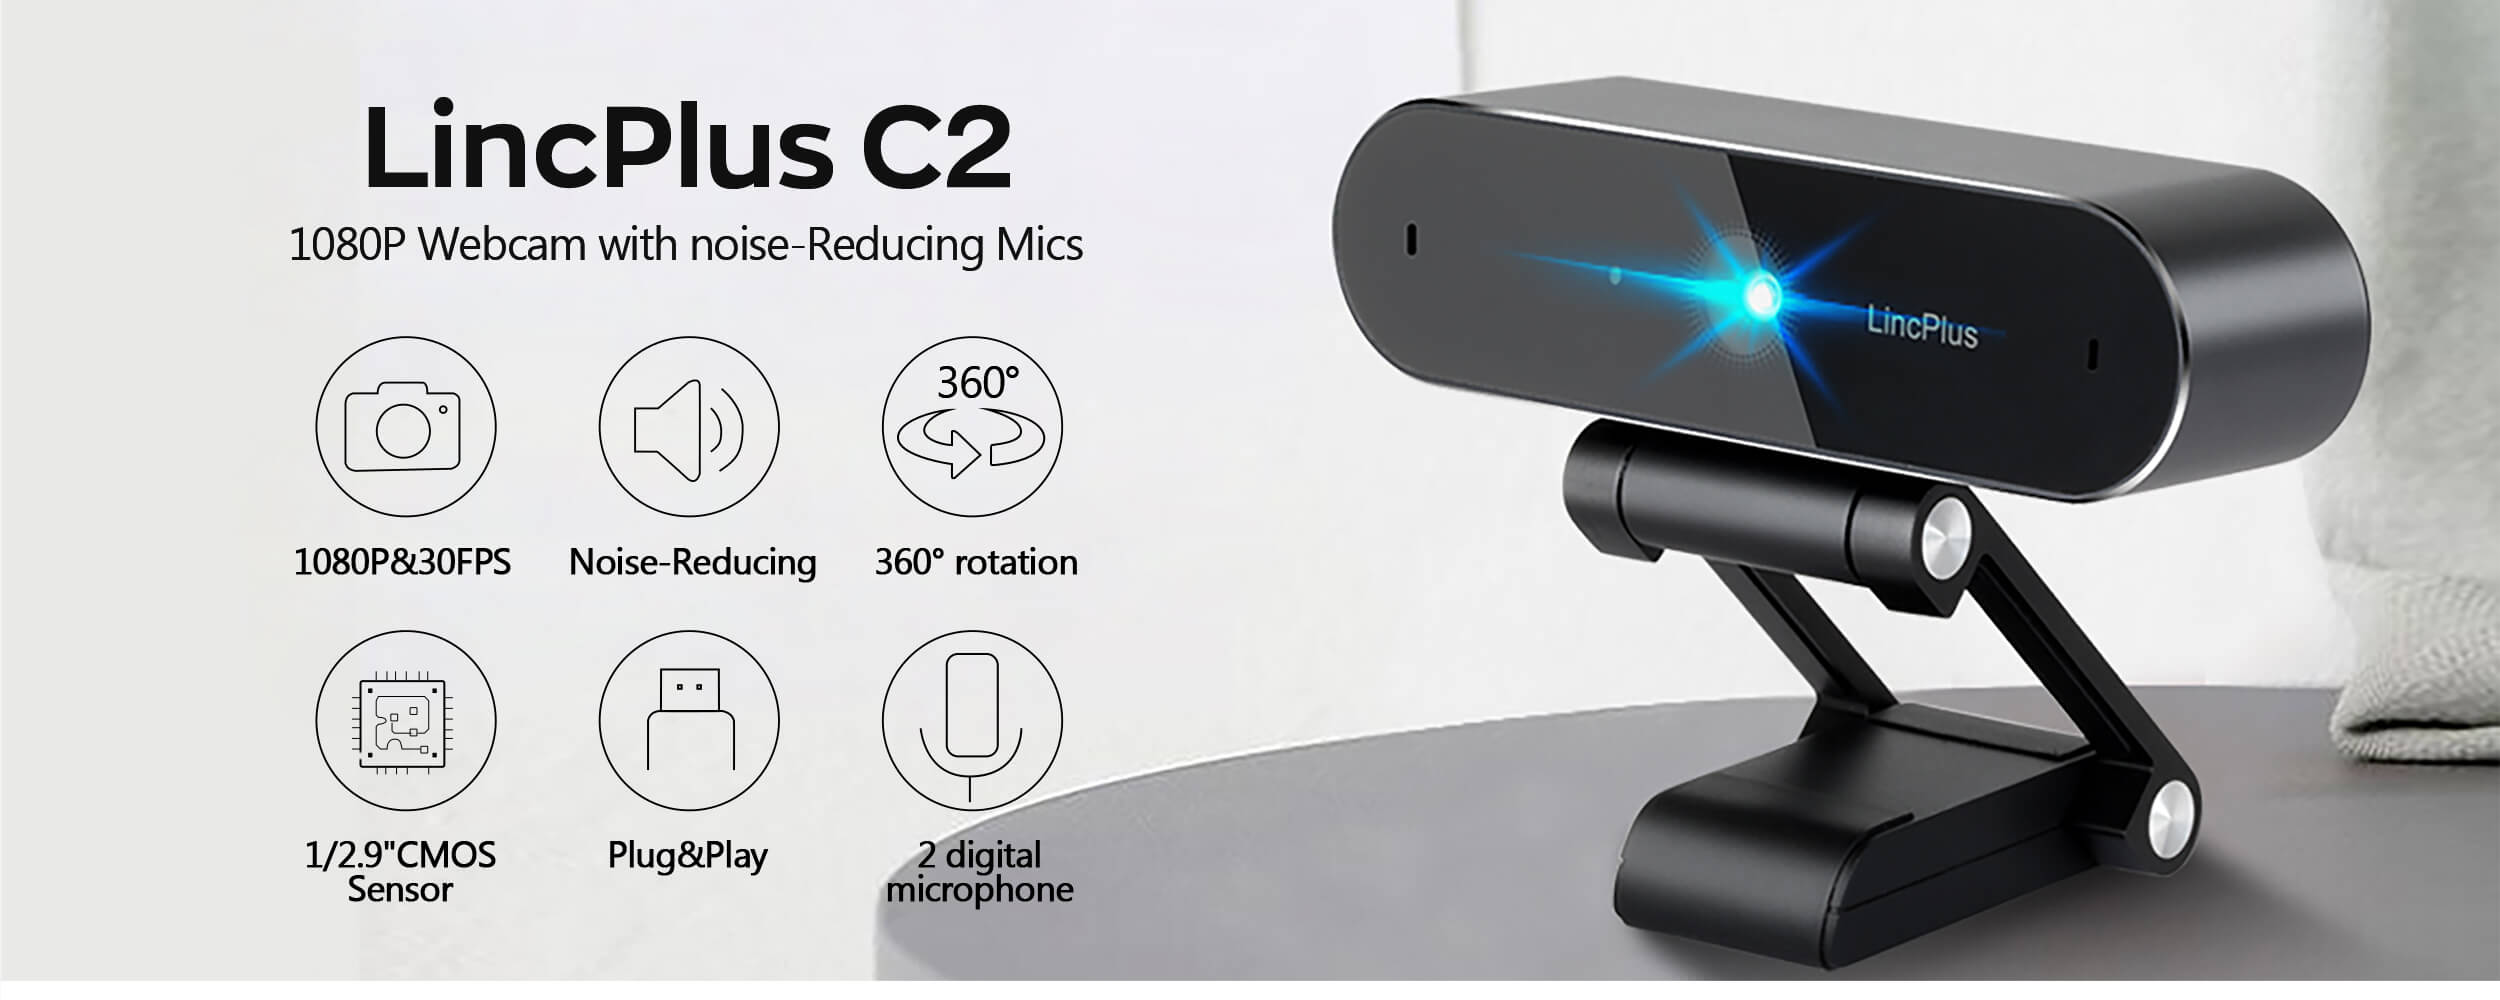 lincplus c2 1080p webcam with noise reduction and full viewing for conference